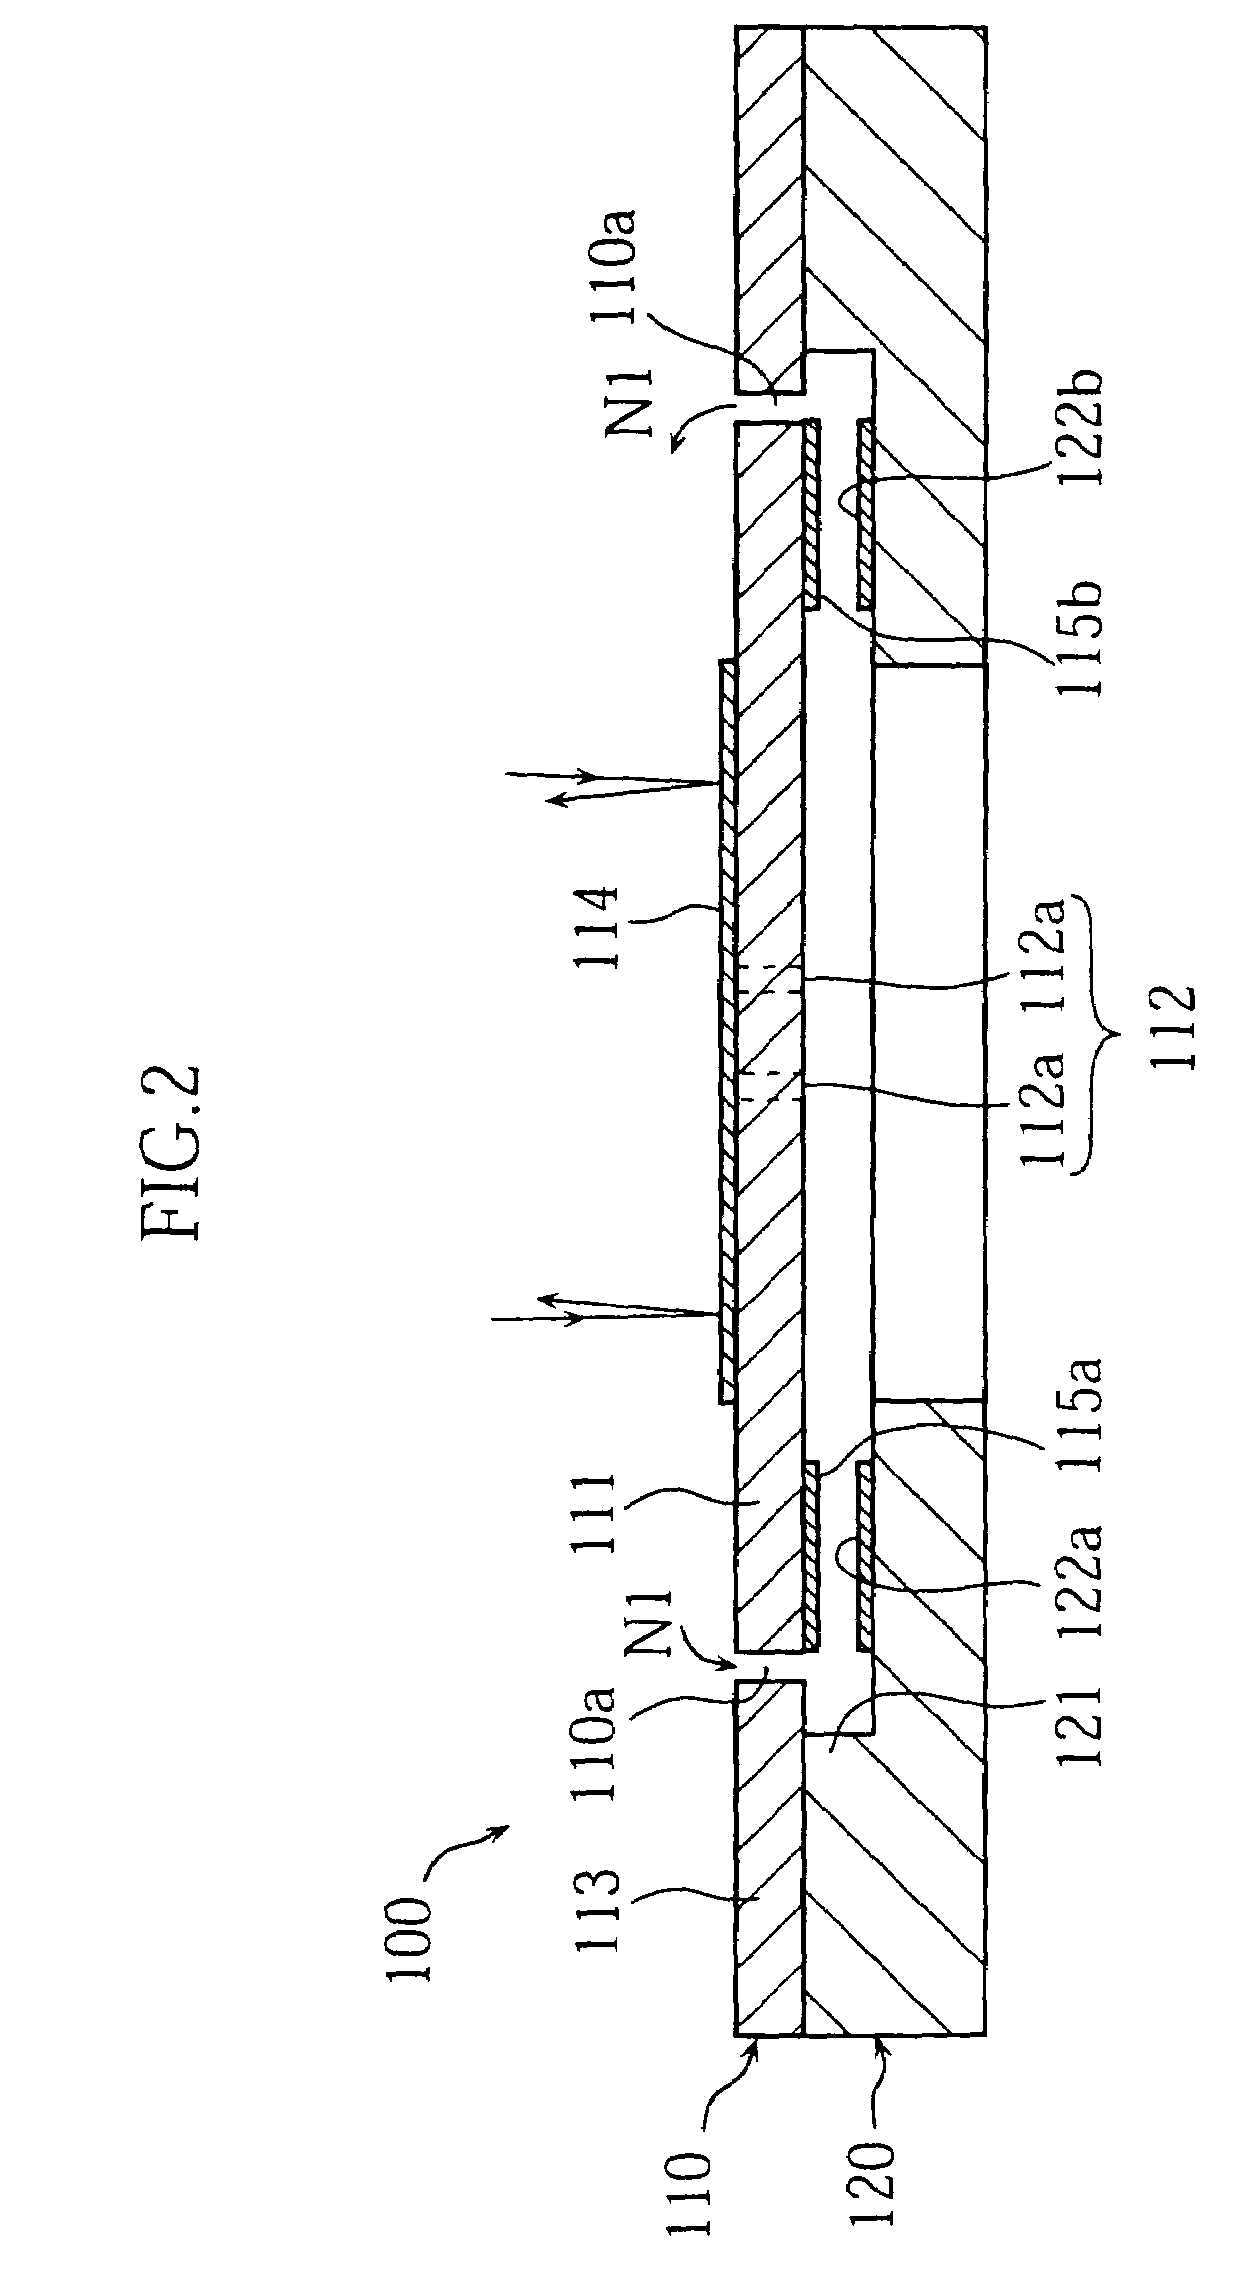 Micromirror unit with torsion connector having nonconstant width